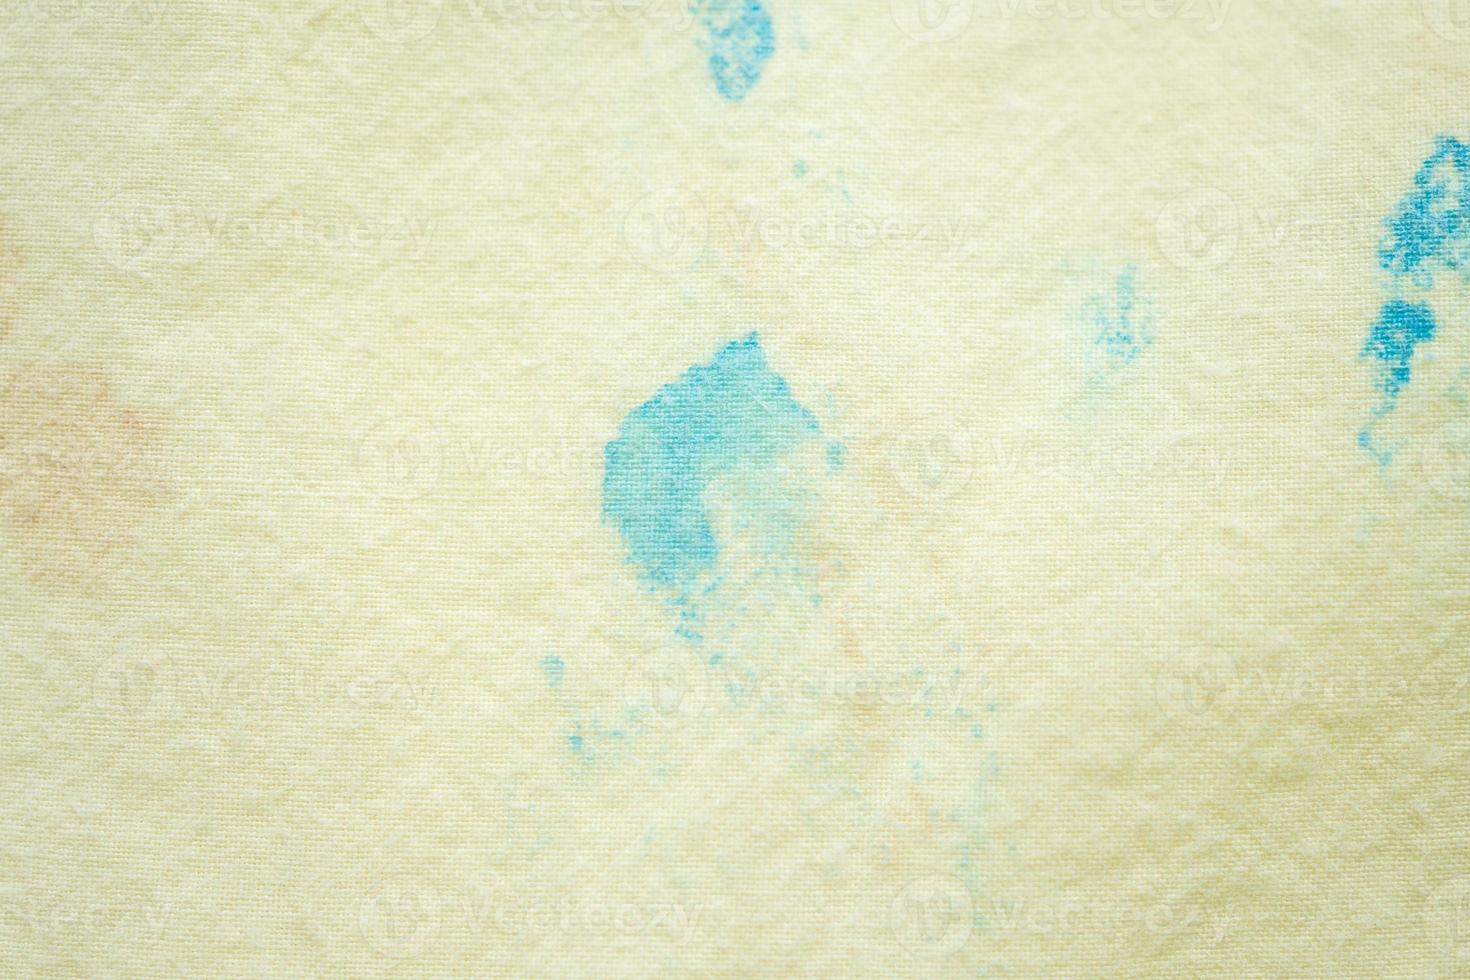 dirty color stain on yellow fabric texture background photo